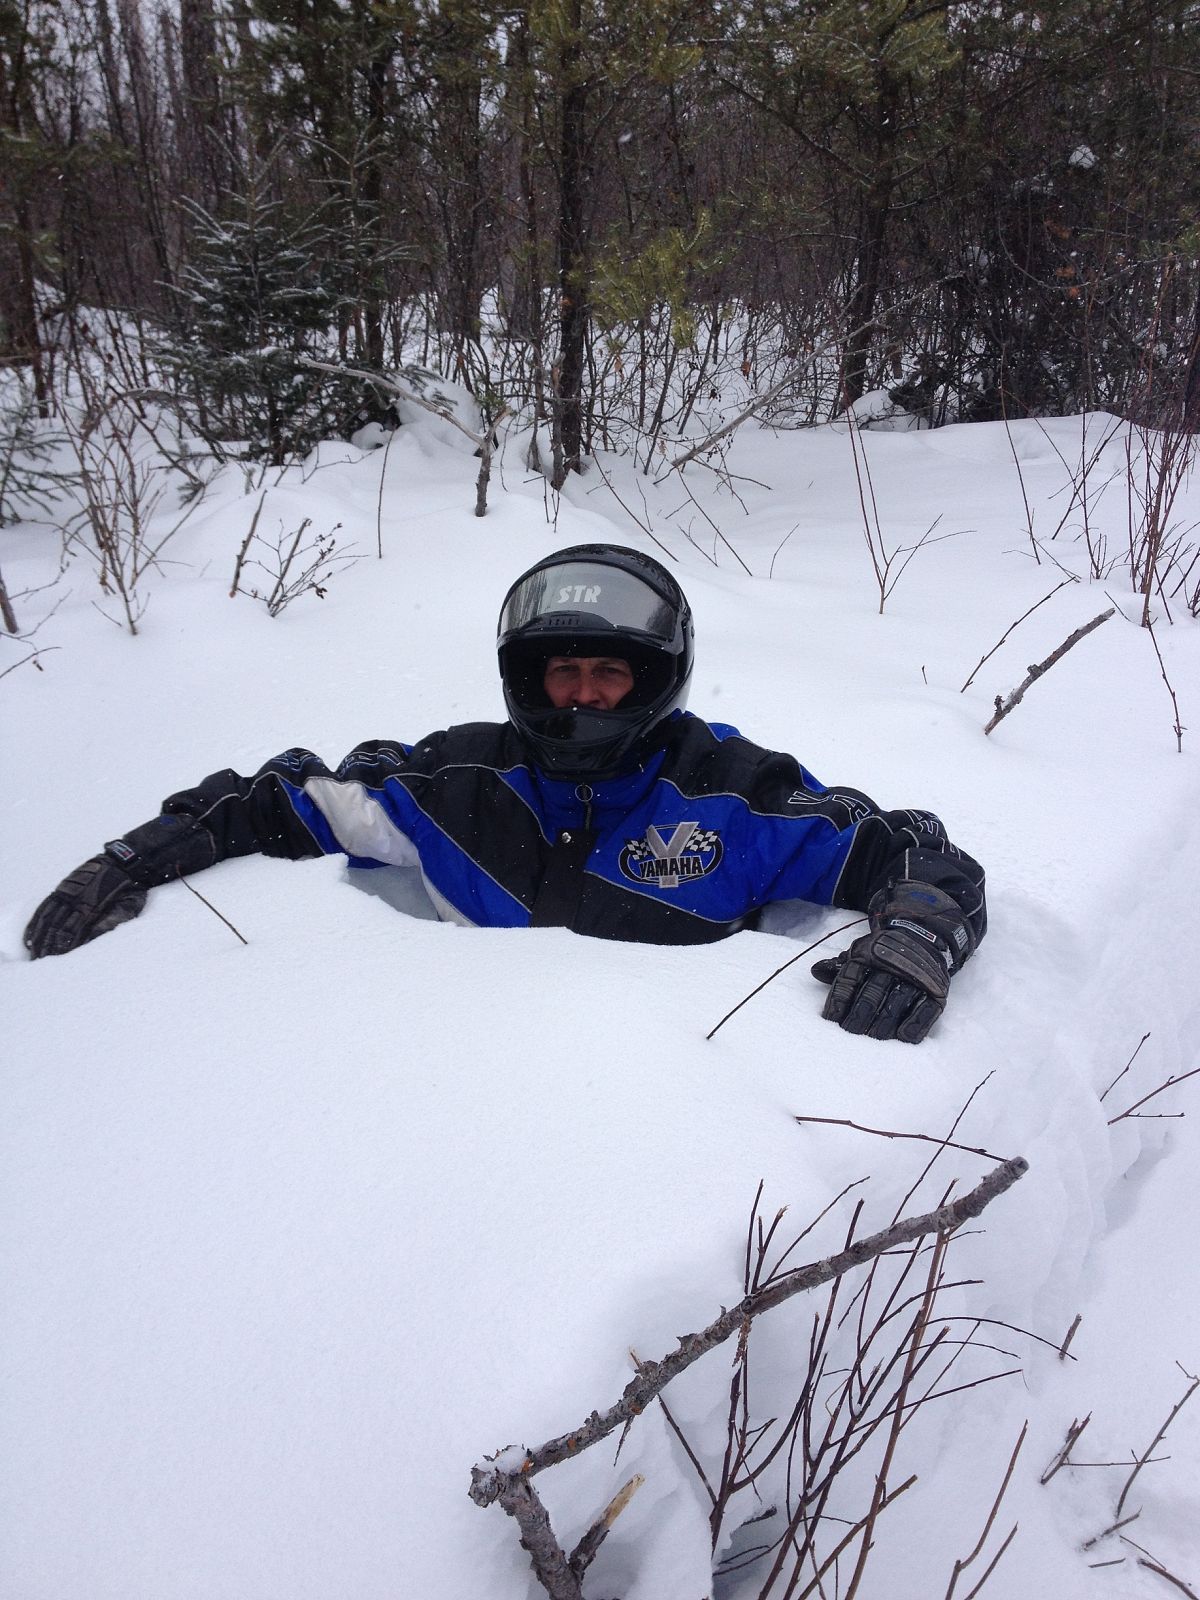 Okay, it's not a snowmobile getting stuck, but instead my husband showing us how deep the snow was.  (he's 5'9")